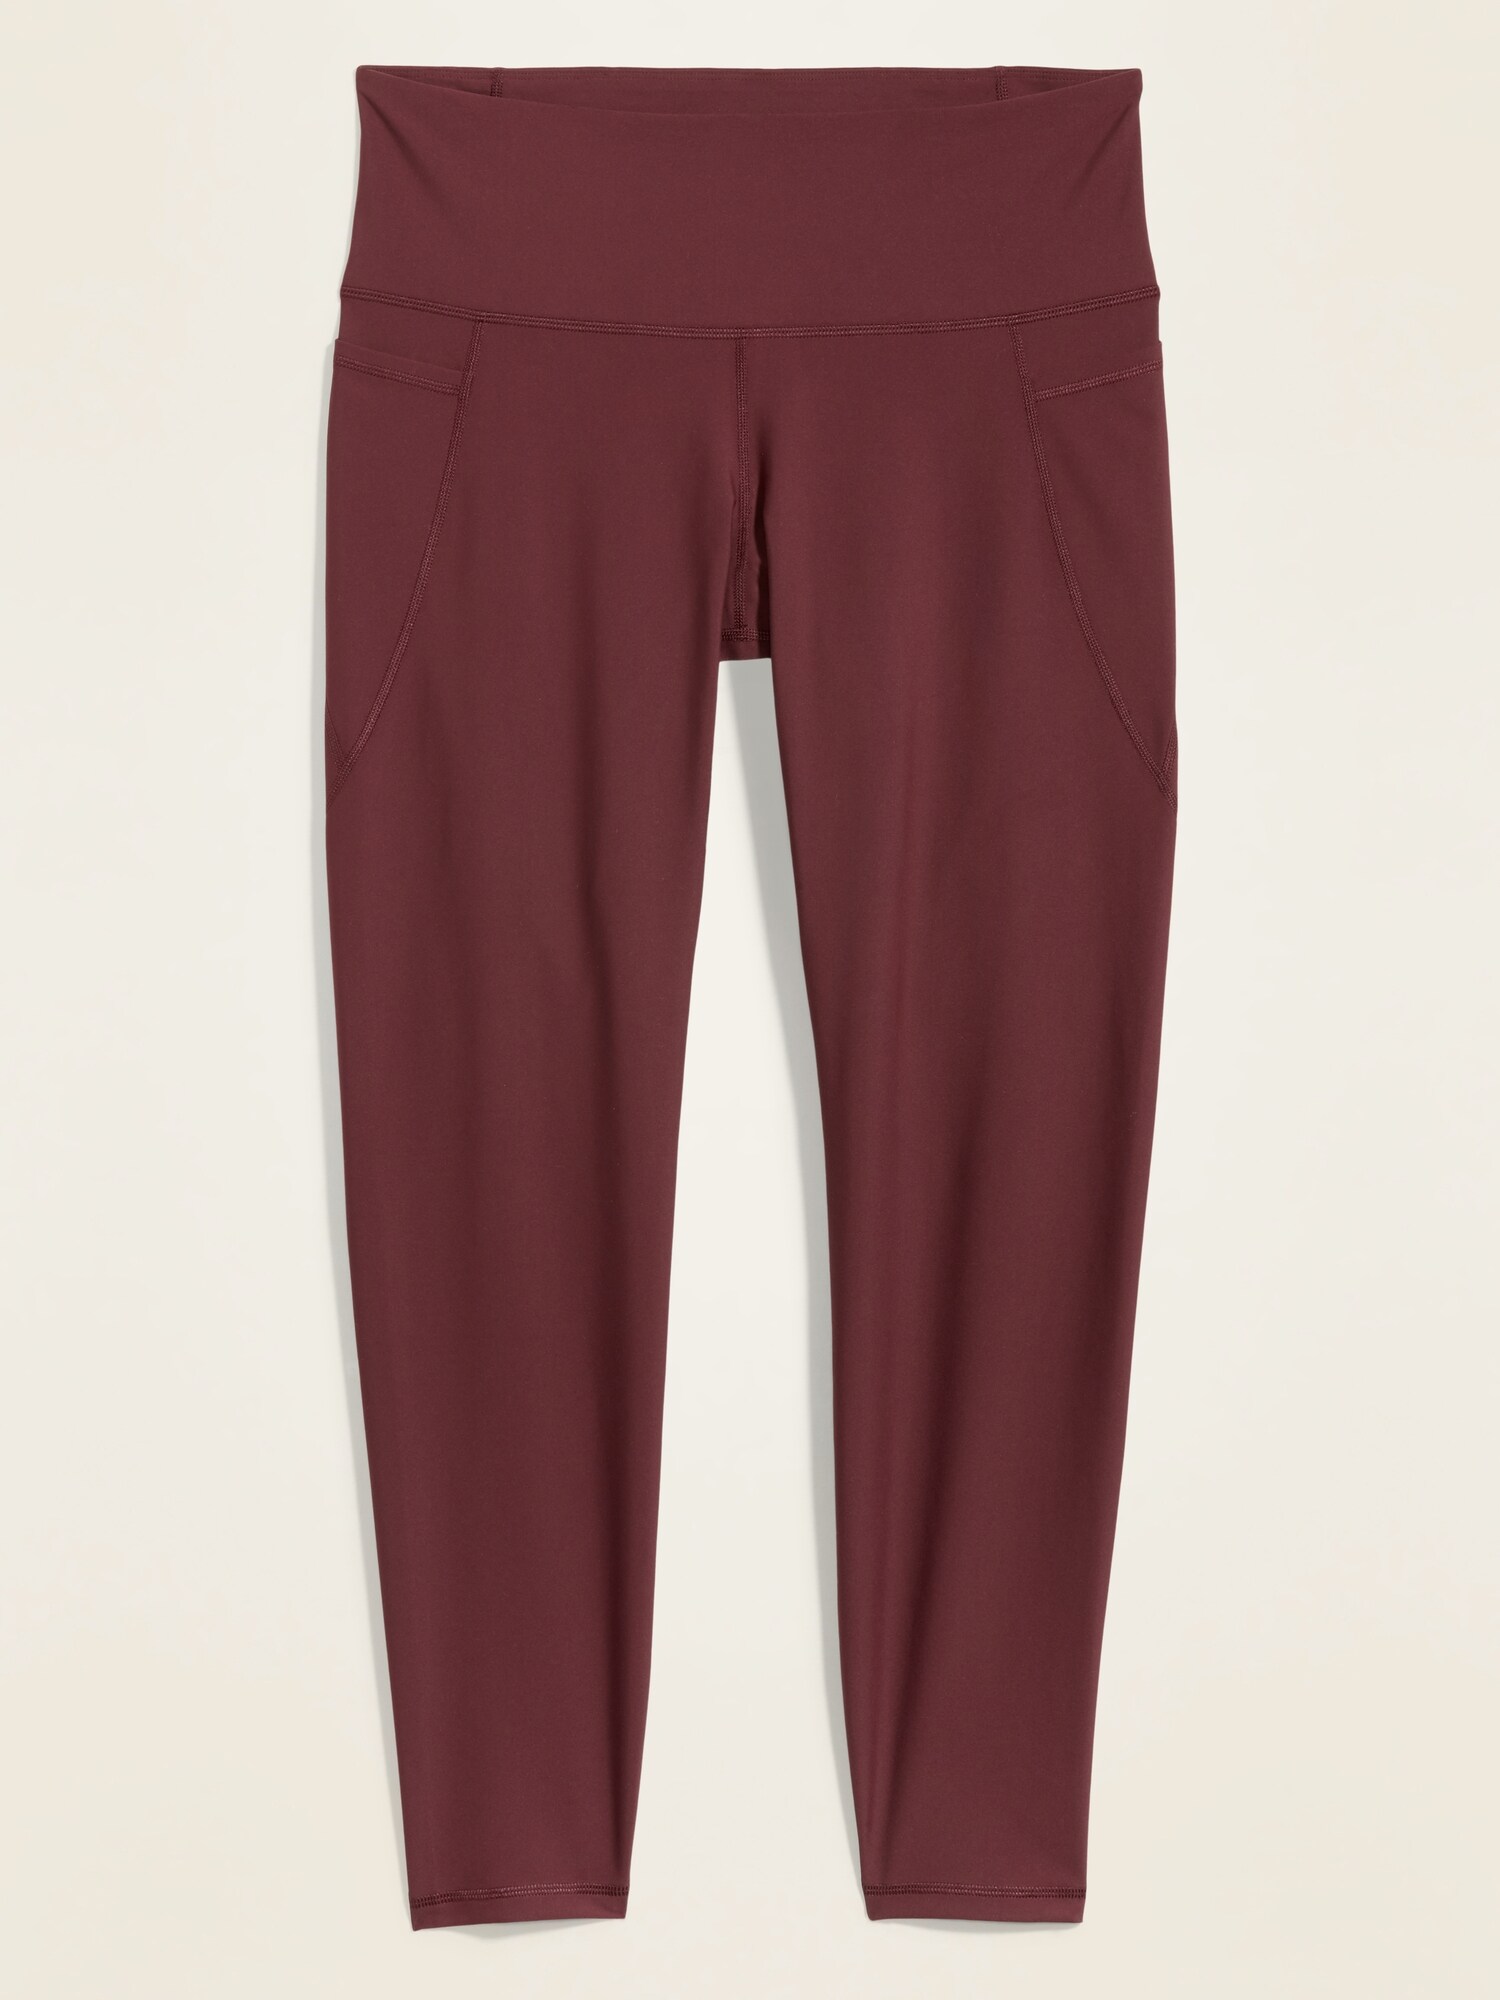 High-Waisted PowerSoft Plus-Size Leggings